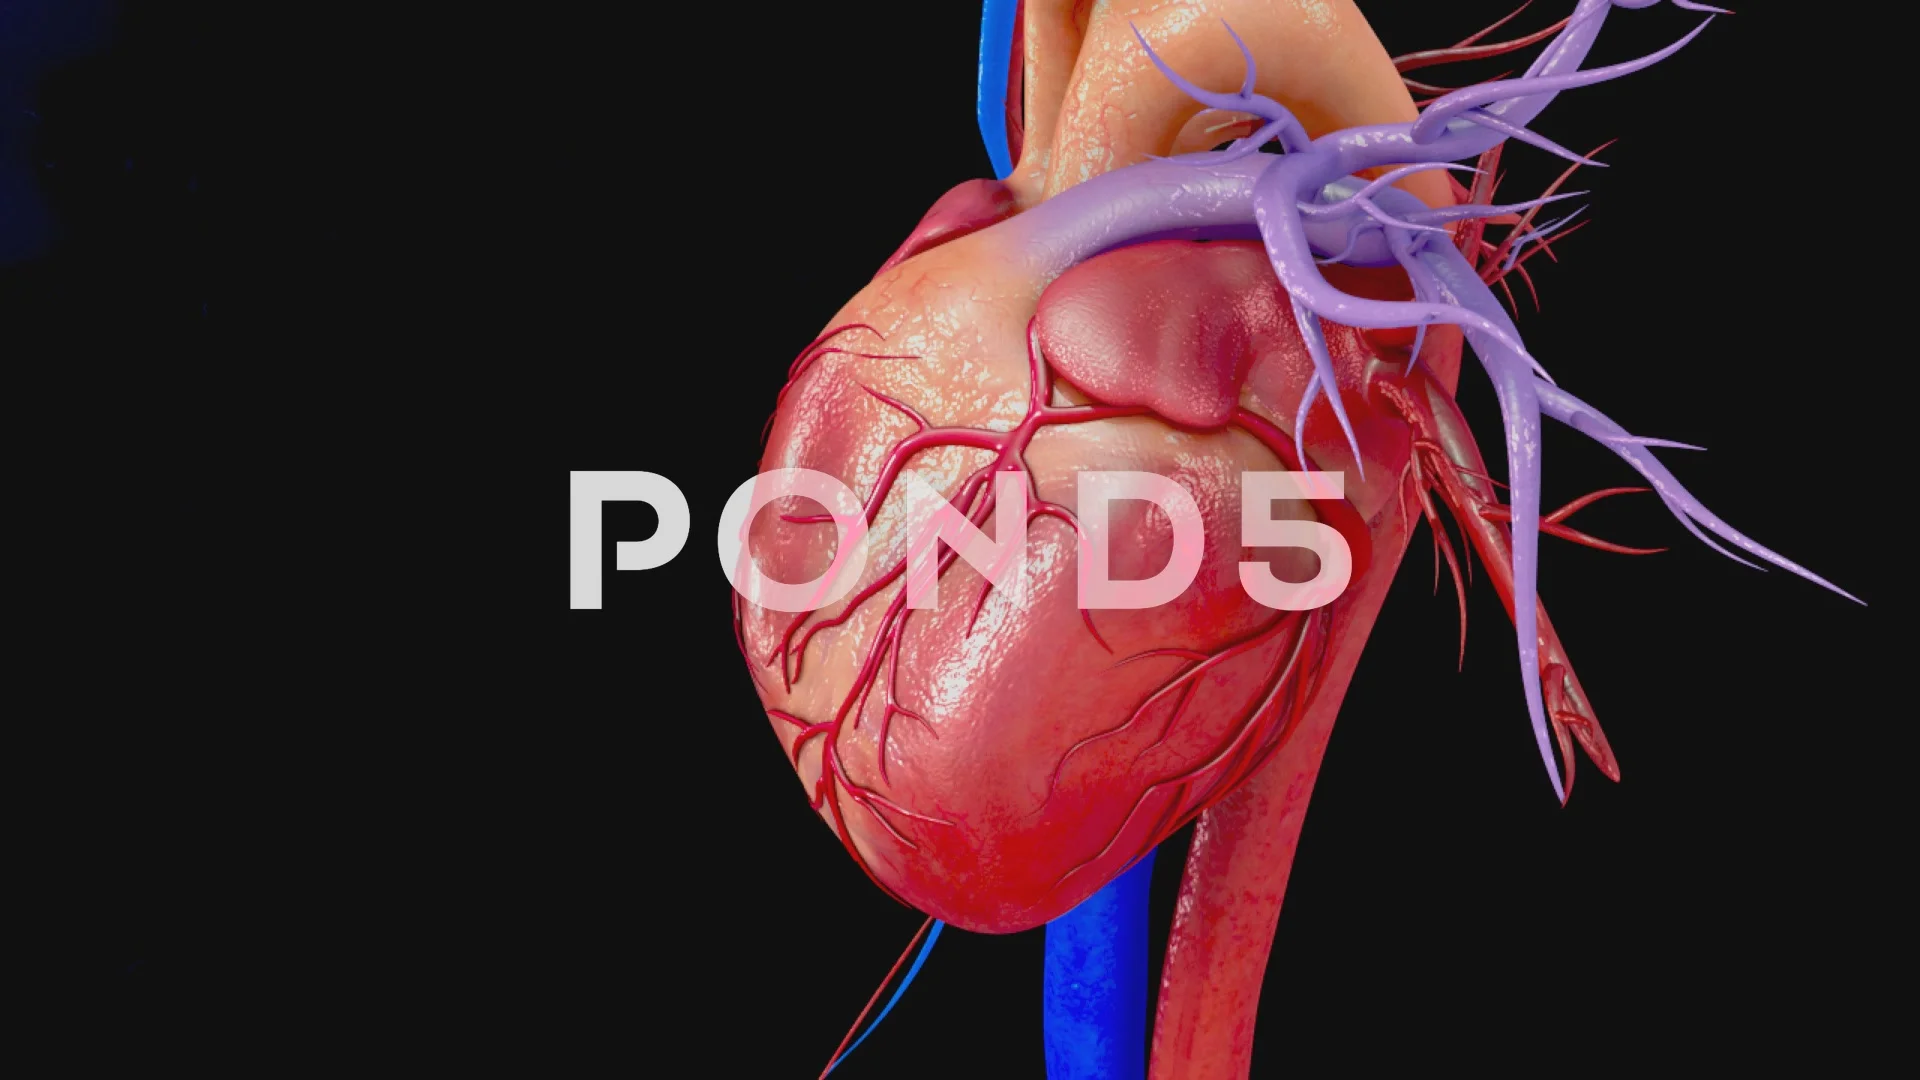 HUMAN HEART 3D animation | Stock Video | Pond5